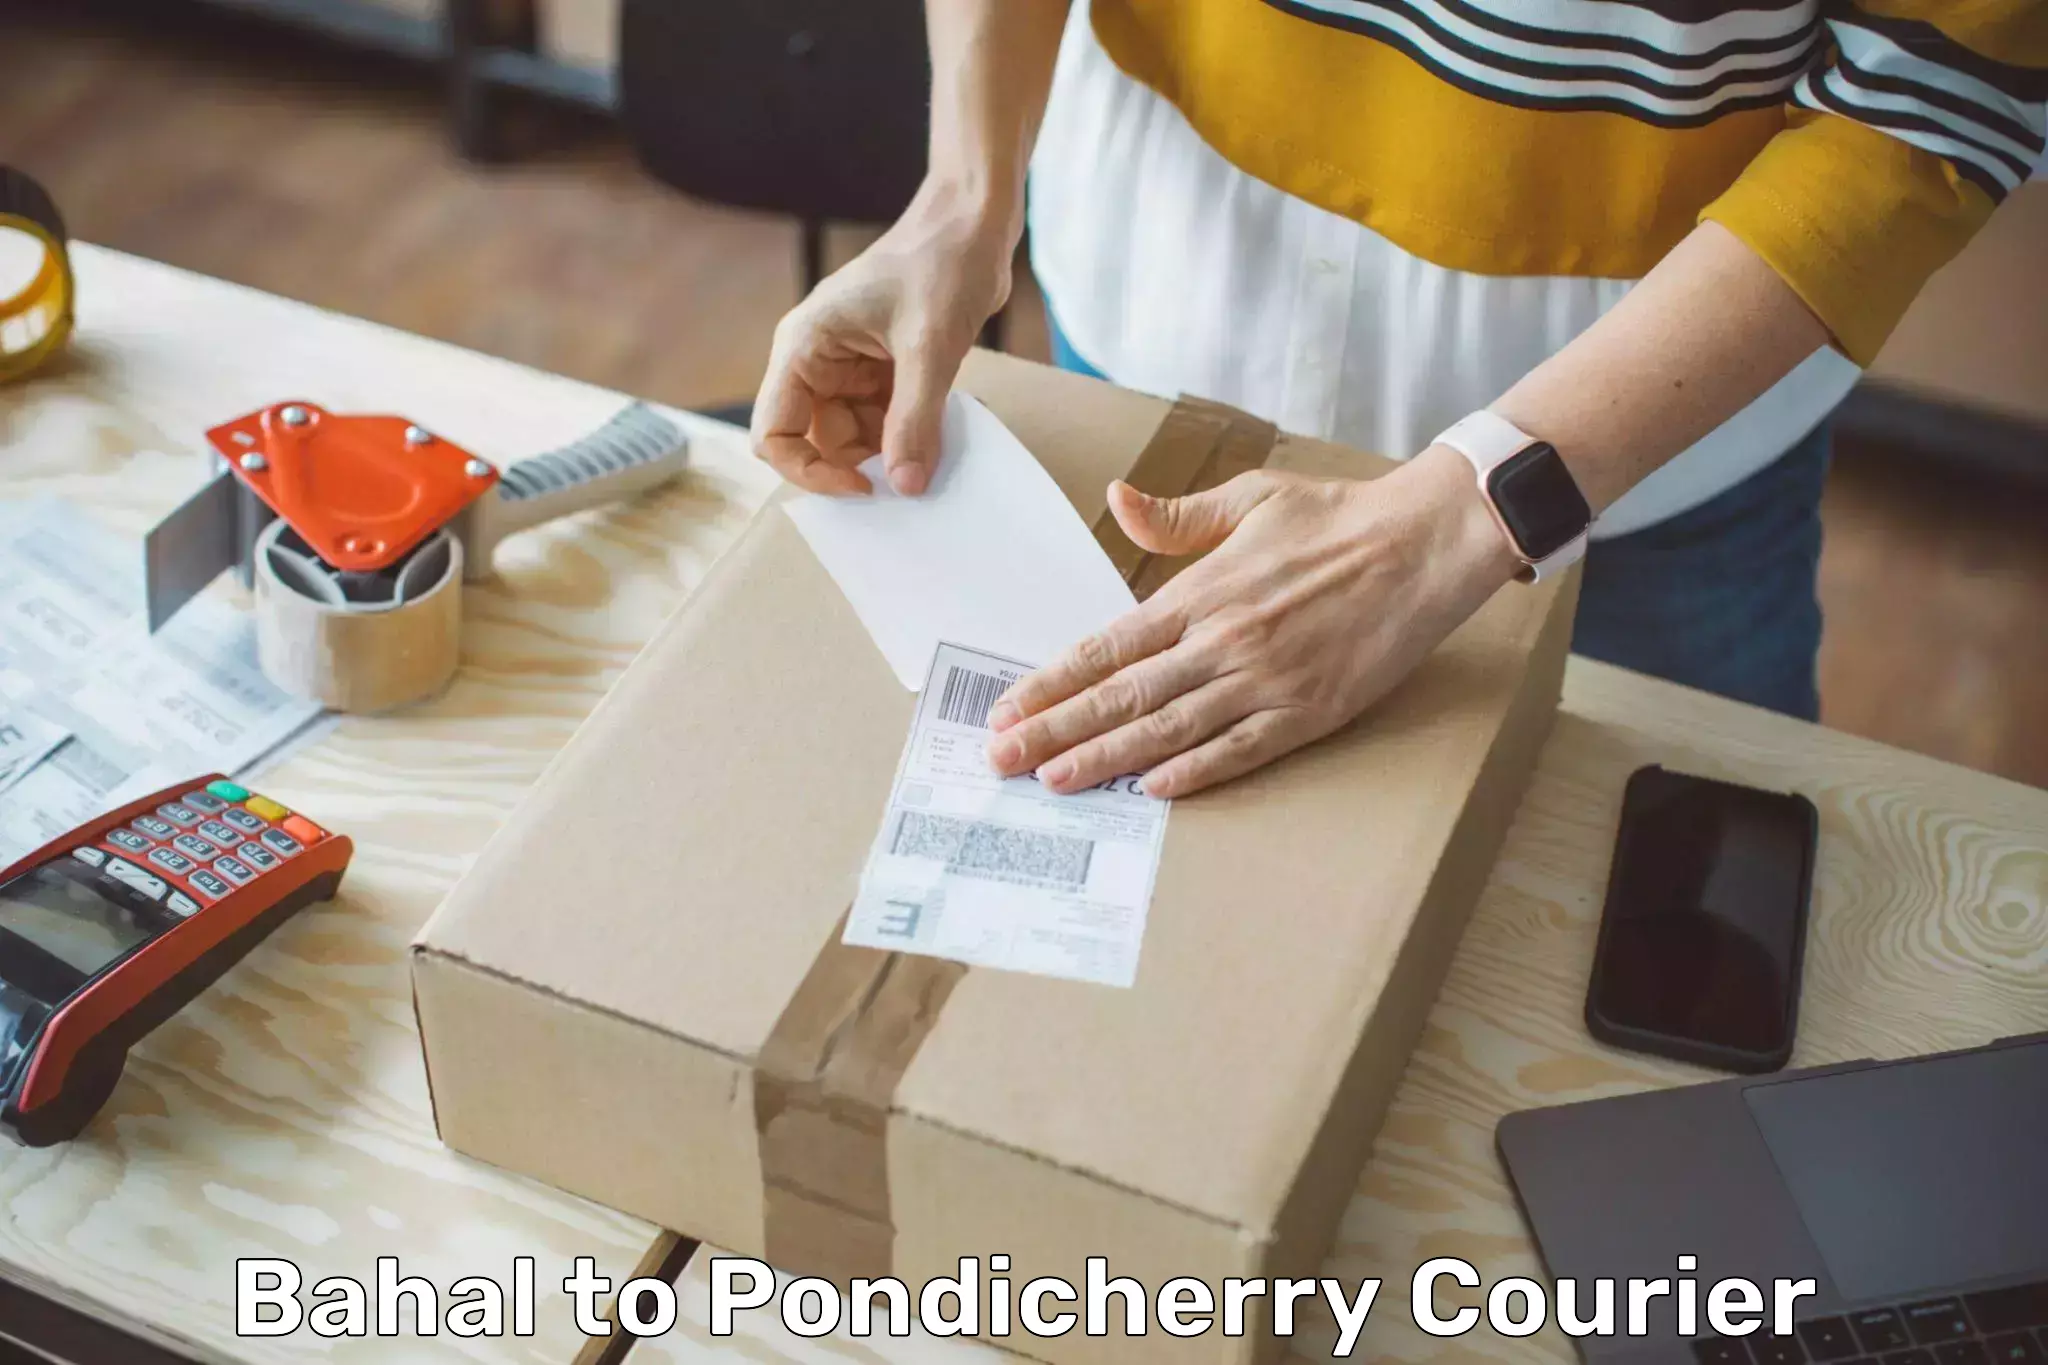 End-to-end delivery in Bahal to Pondicherry University